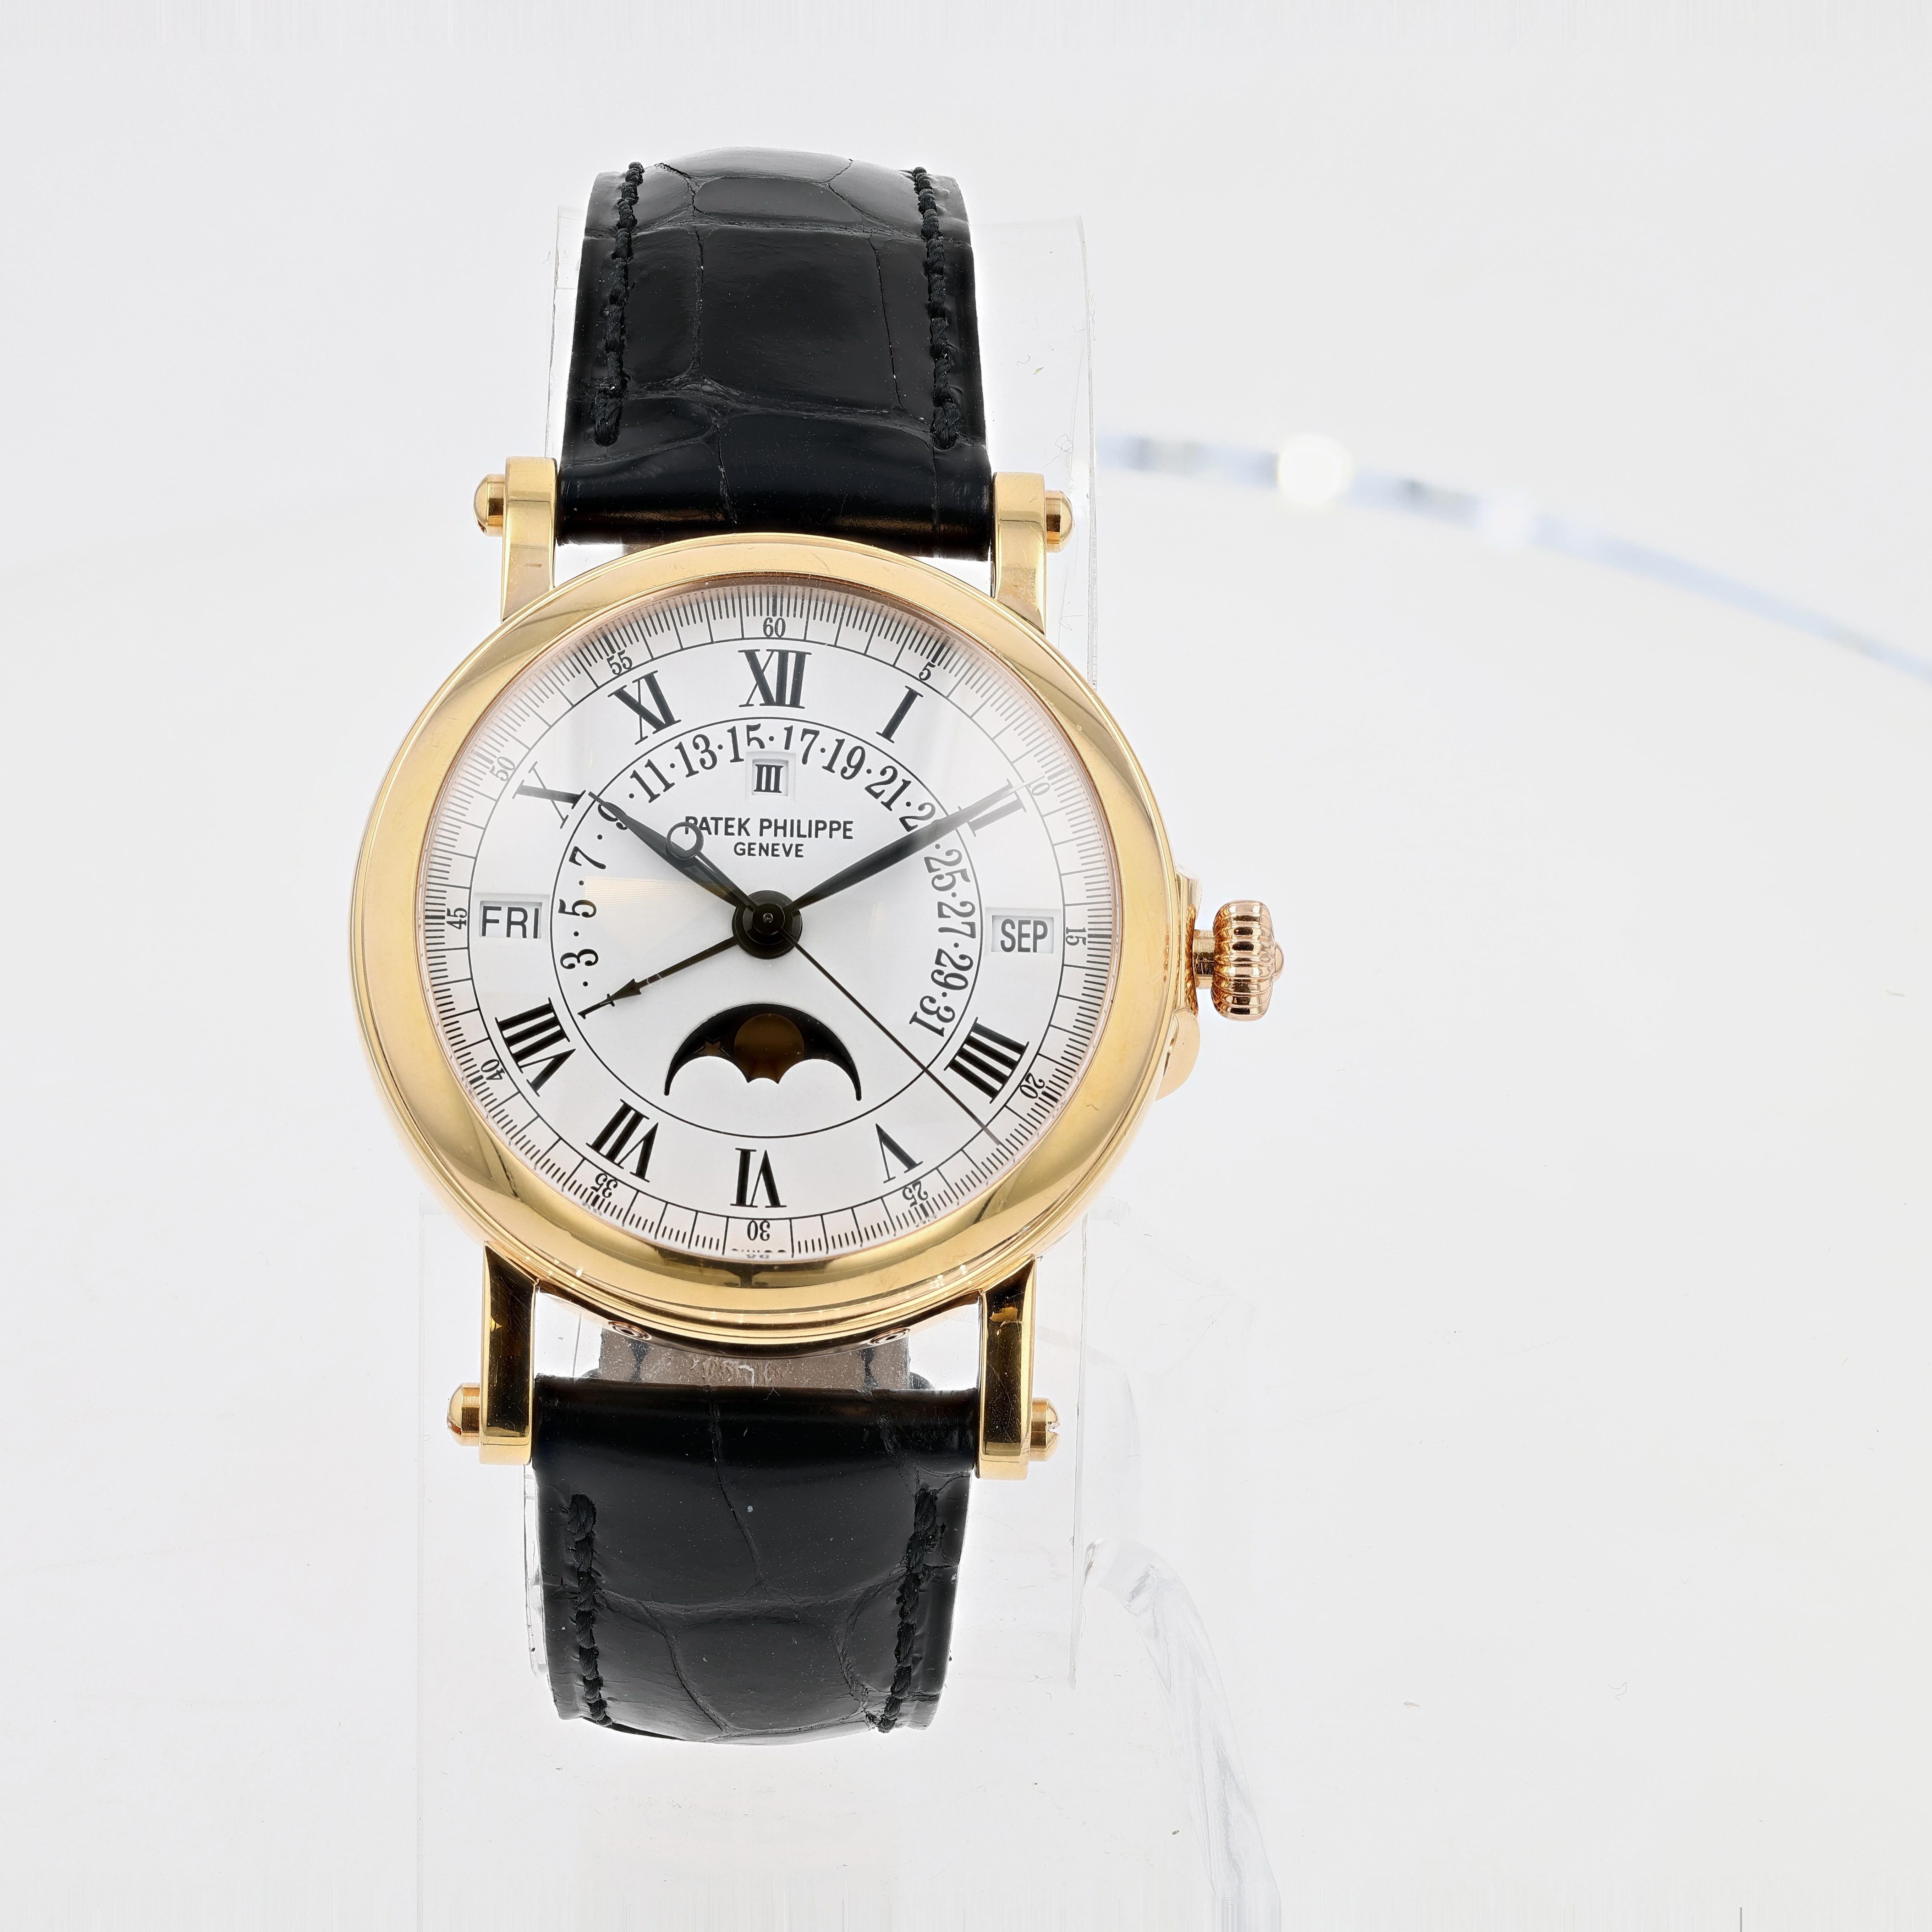 18K Rose Gold PATEK PHILIPPE PERPETUAL CALENDAR, REF#5059R-0001. The watch features 36mm case with white dial. Complications include Day, Date, Month, Moonphase, Retrograde Sector for days of the month. The watch is presented on a black alligator